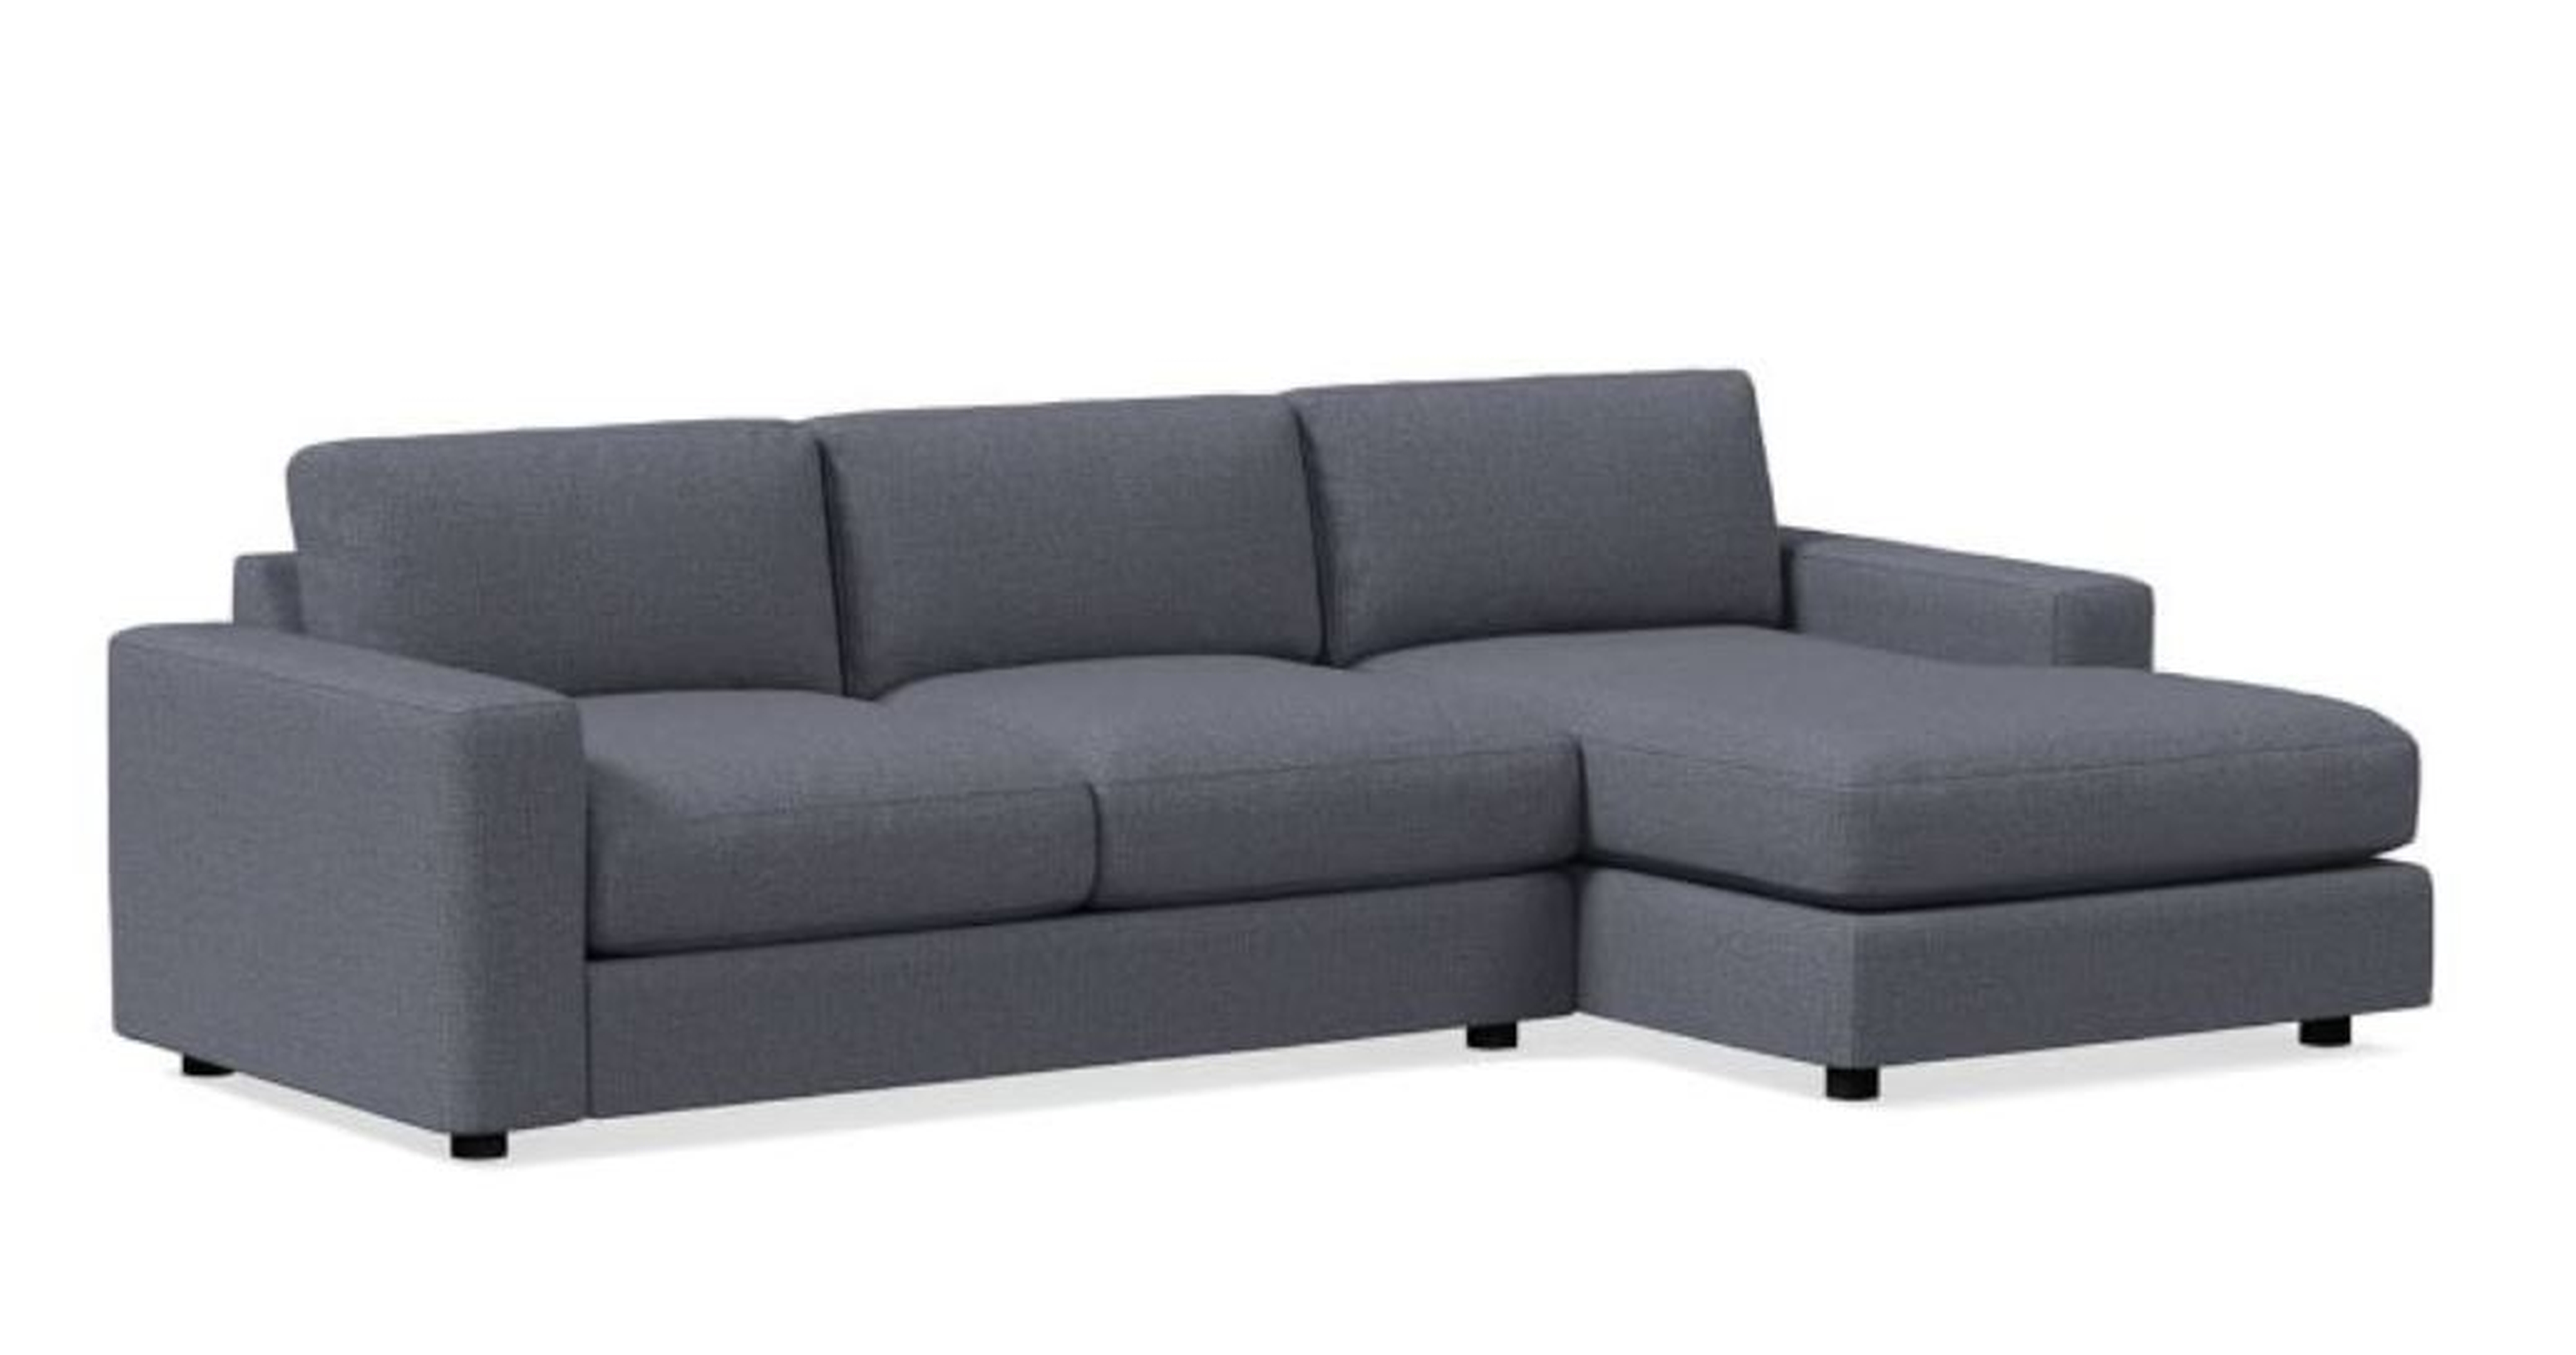 Urban 2-piece Chaise Sectional - right facing, Small (standard depth 39") - West Elm